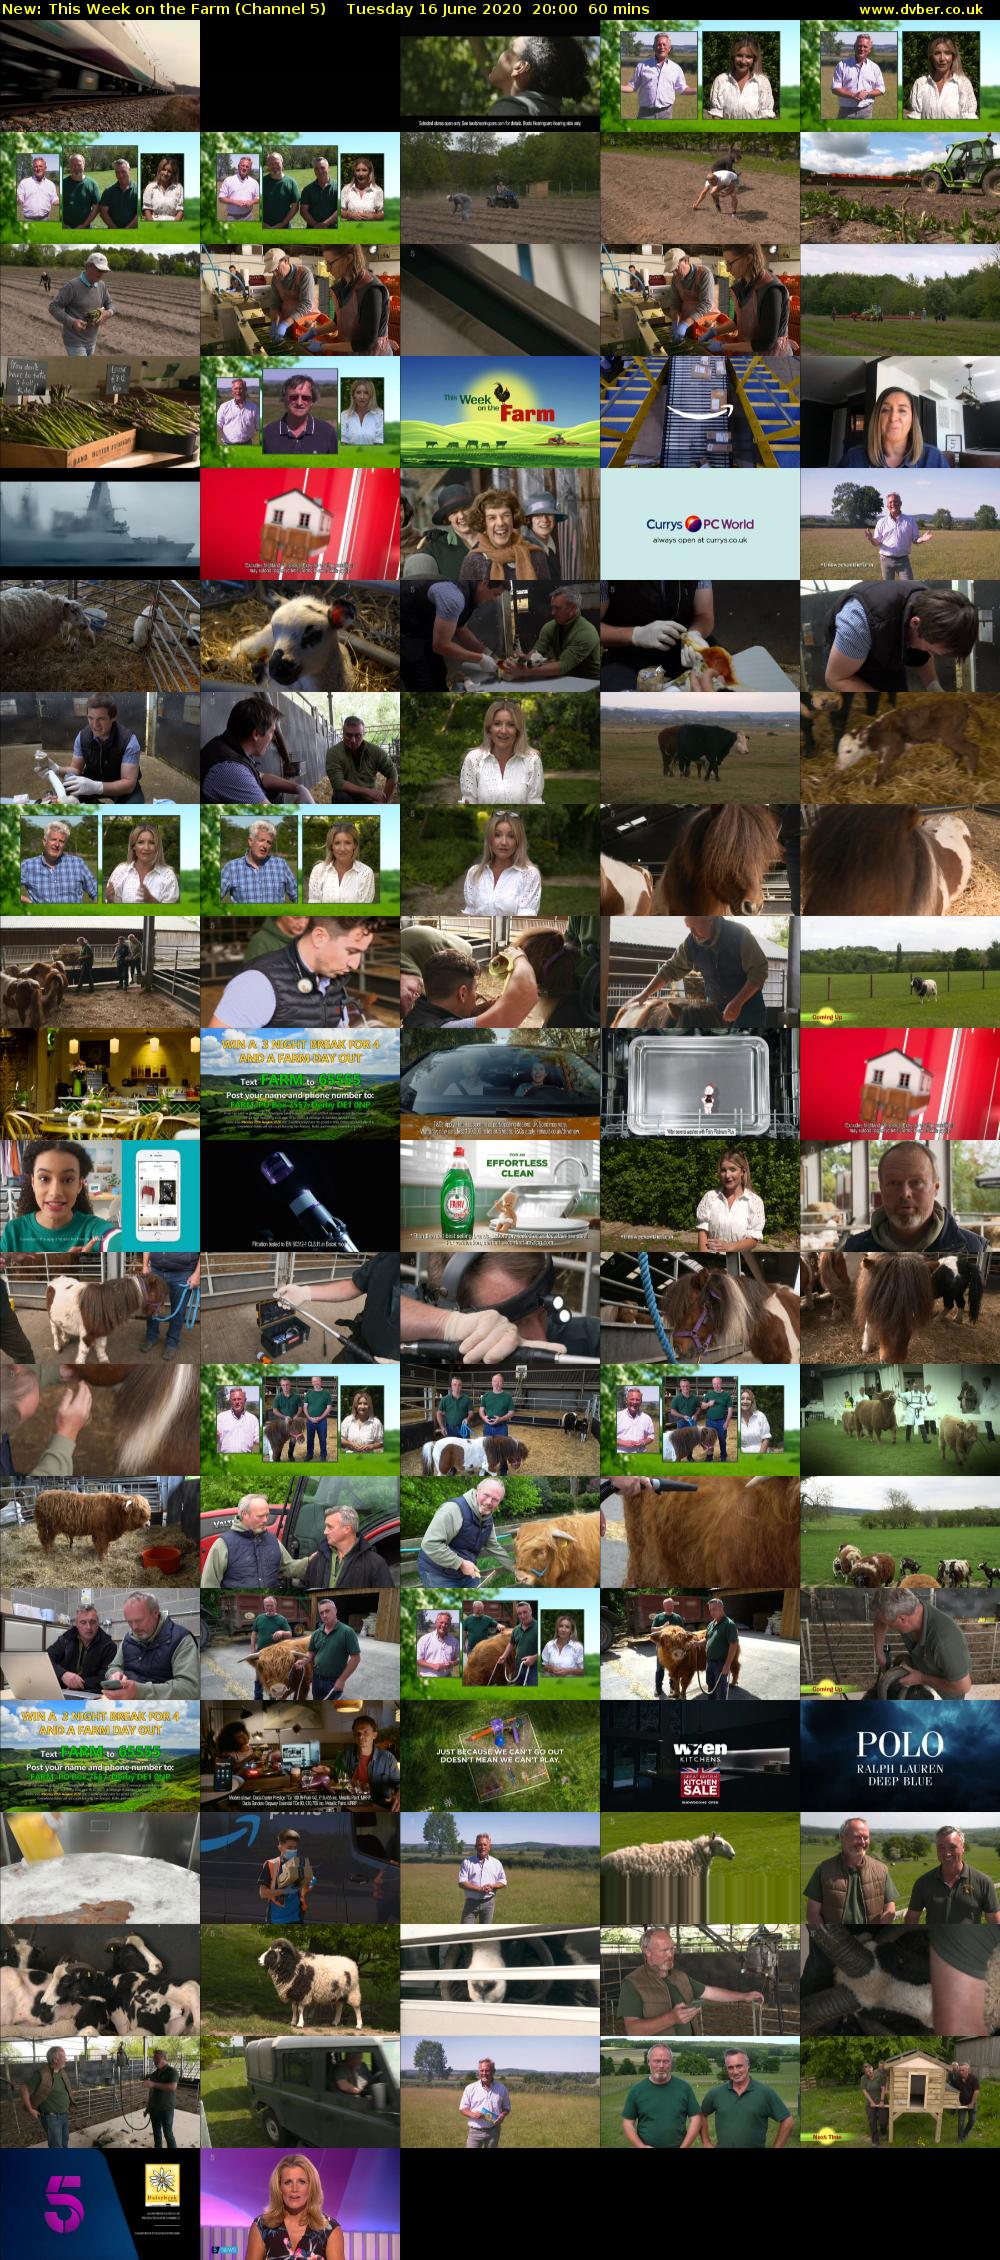 This Week on the Farm (Channel 5) Tuesday 16 June 2020 20:00 - 21:00